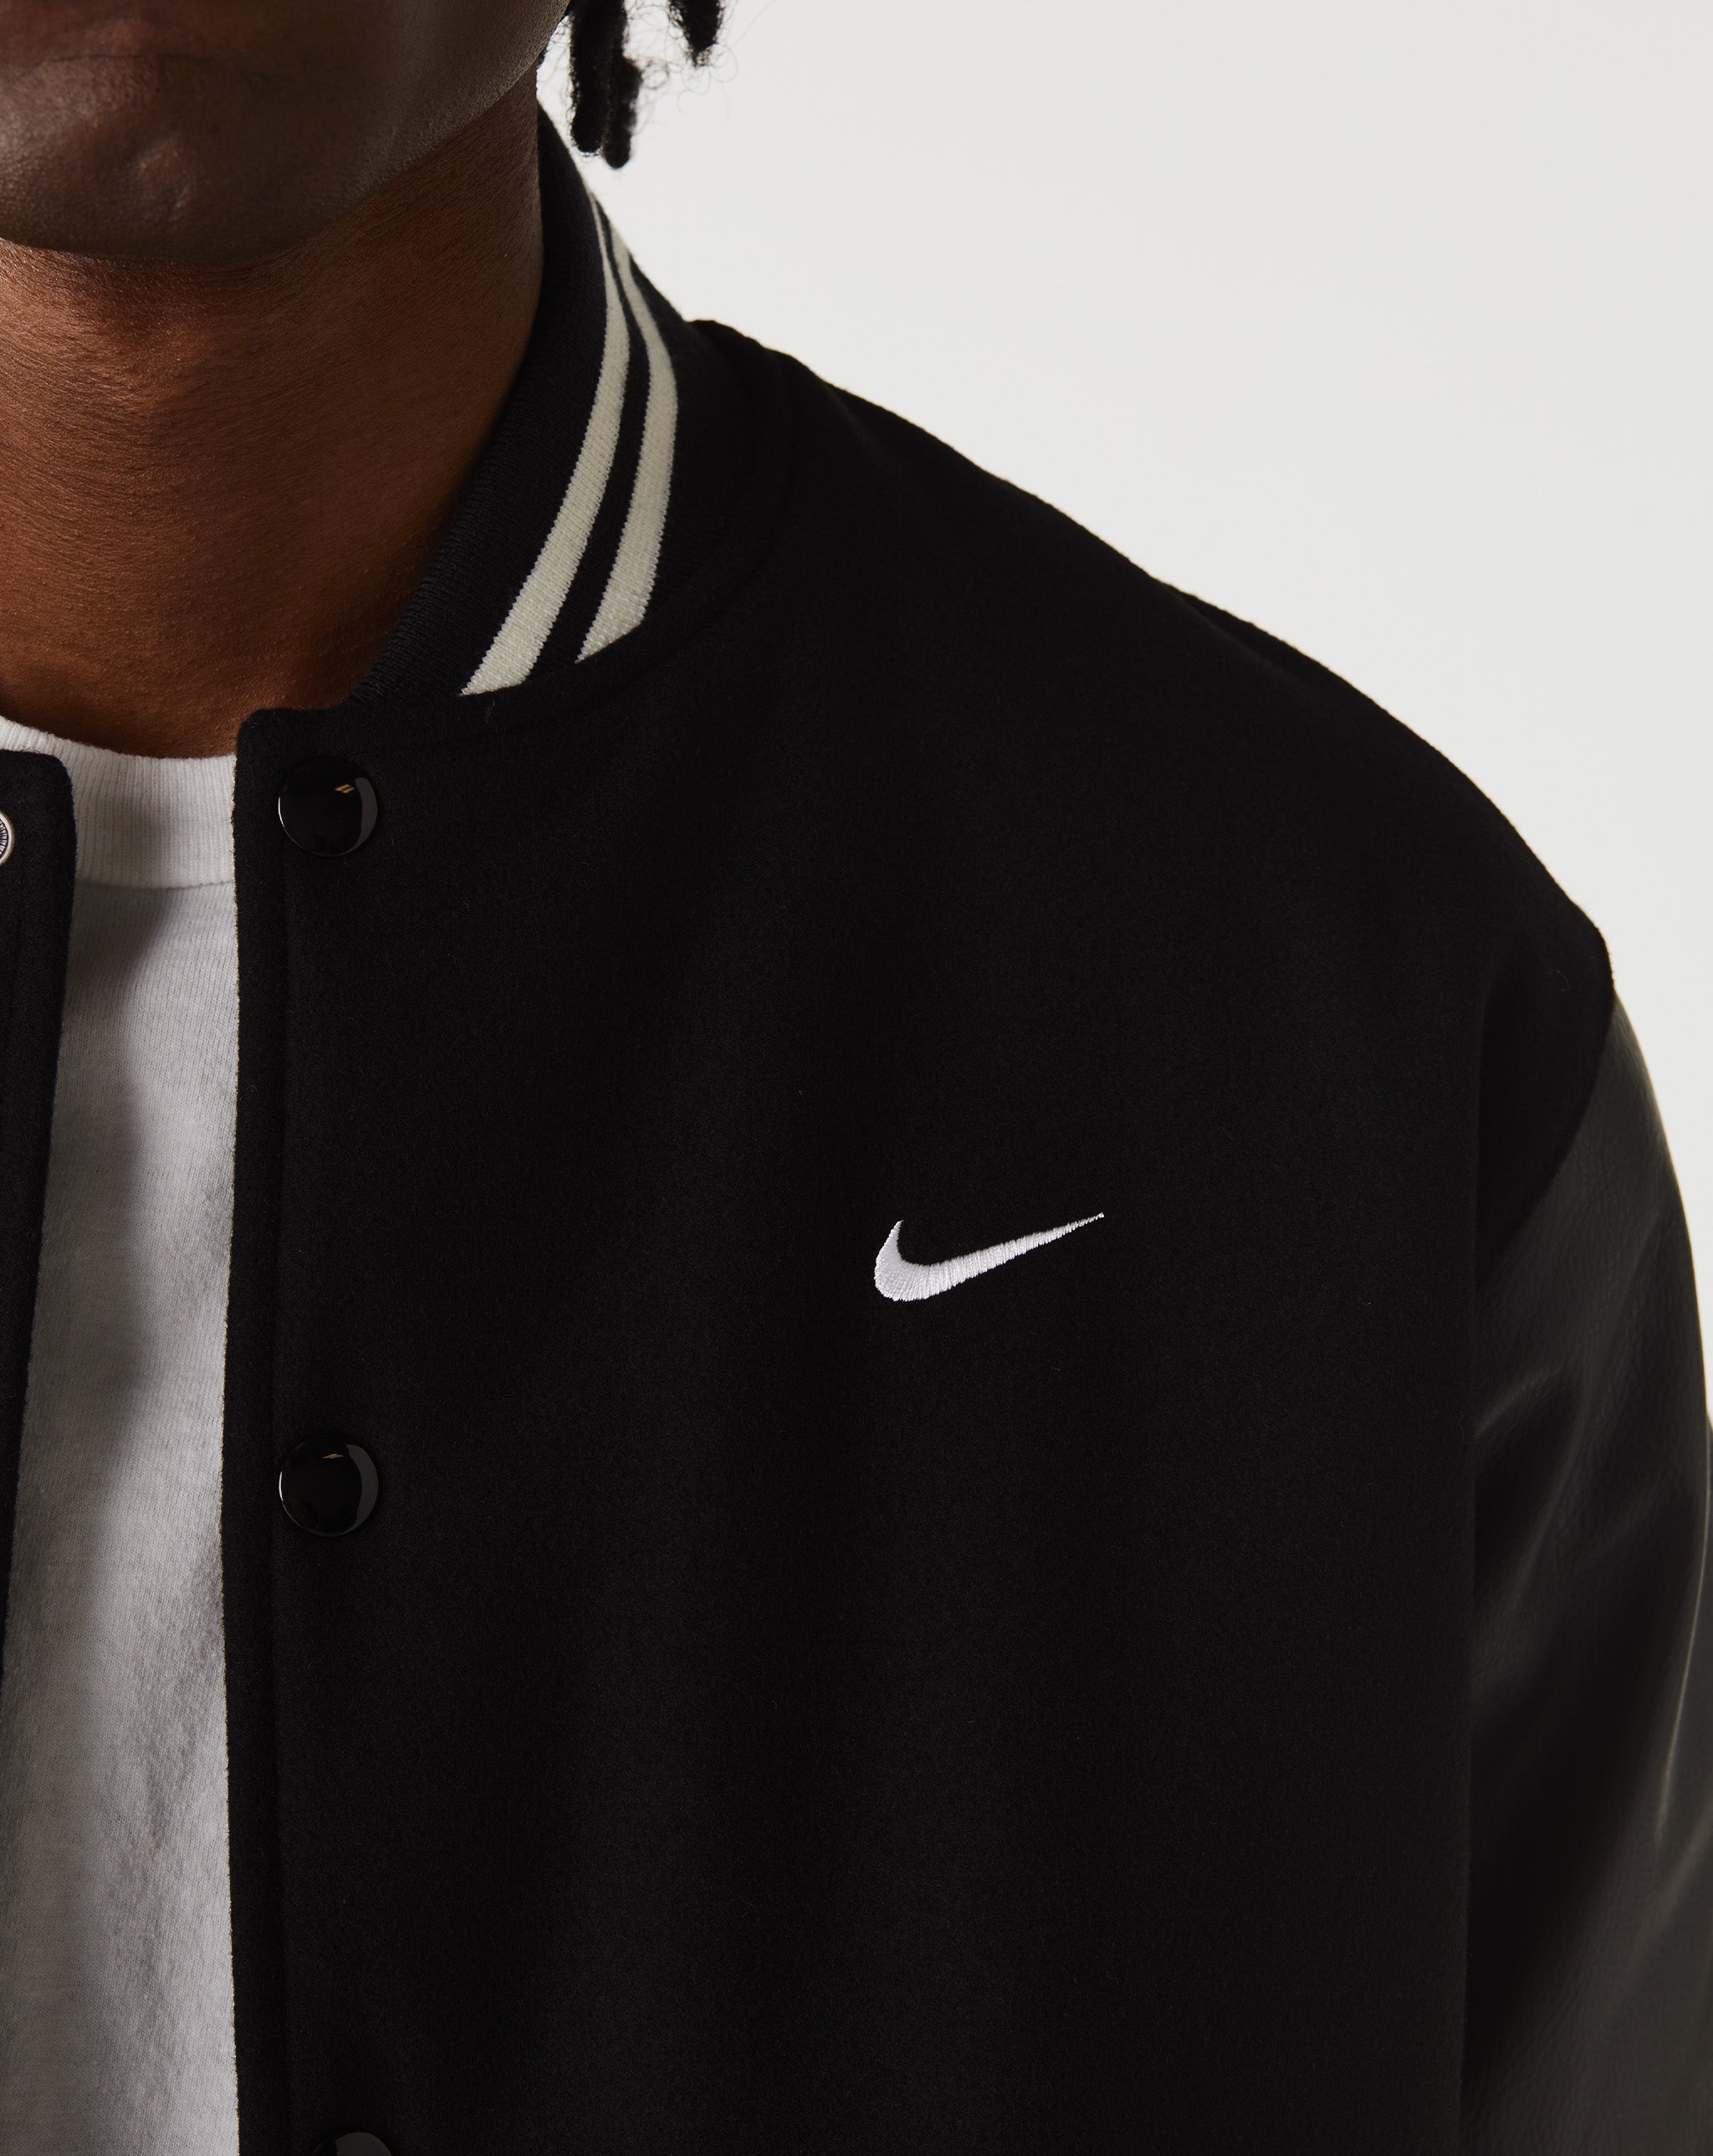 Nike The Nike Air Jordan Jumpman Classics Jacket on sale from €80 for only €39  - Cheap Urlfreeze Jordan outlet